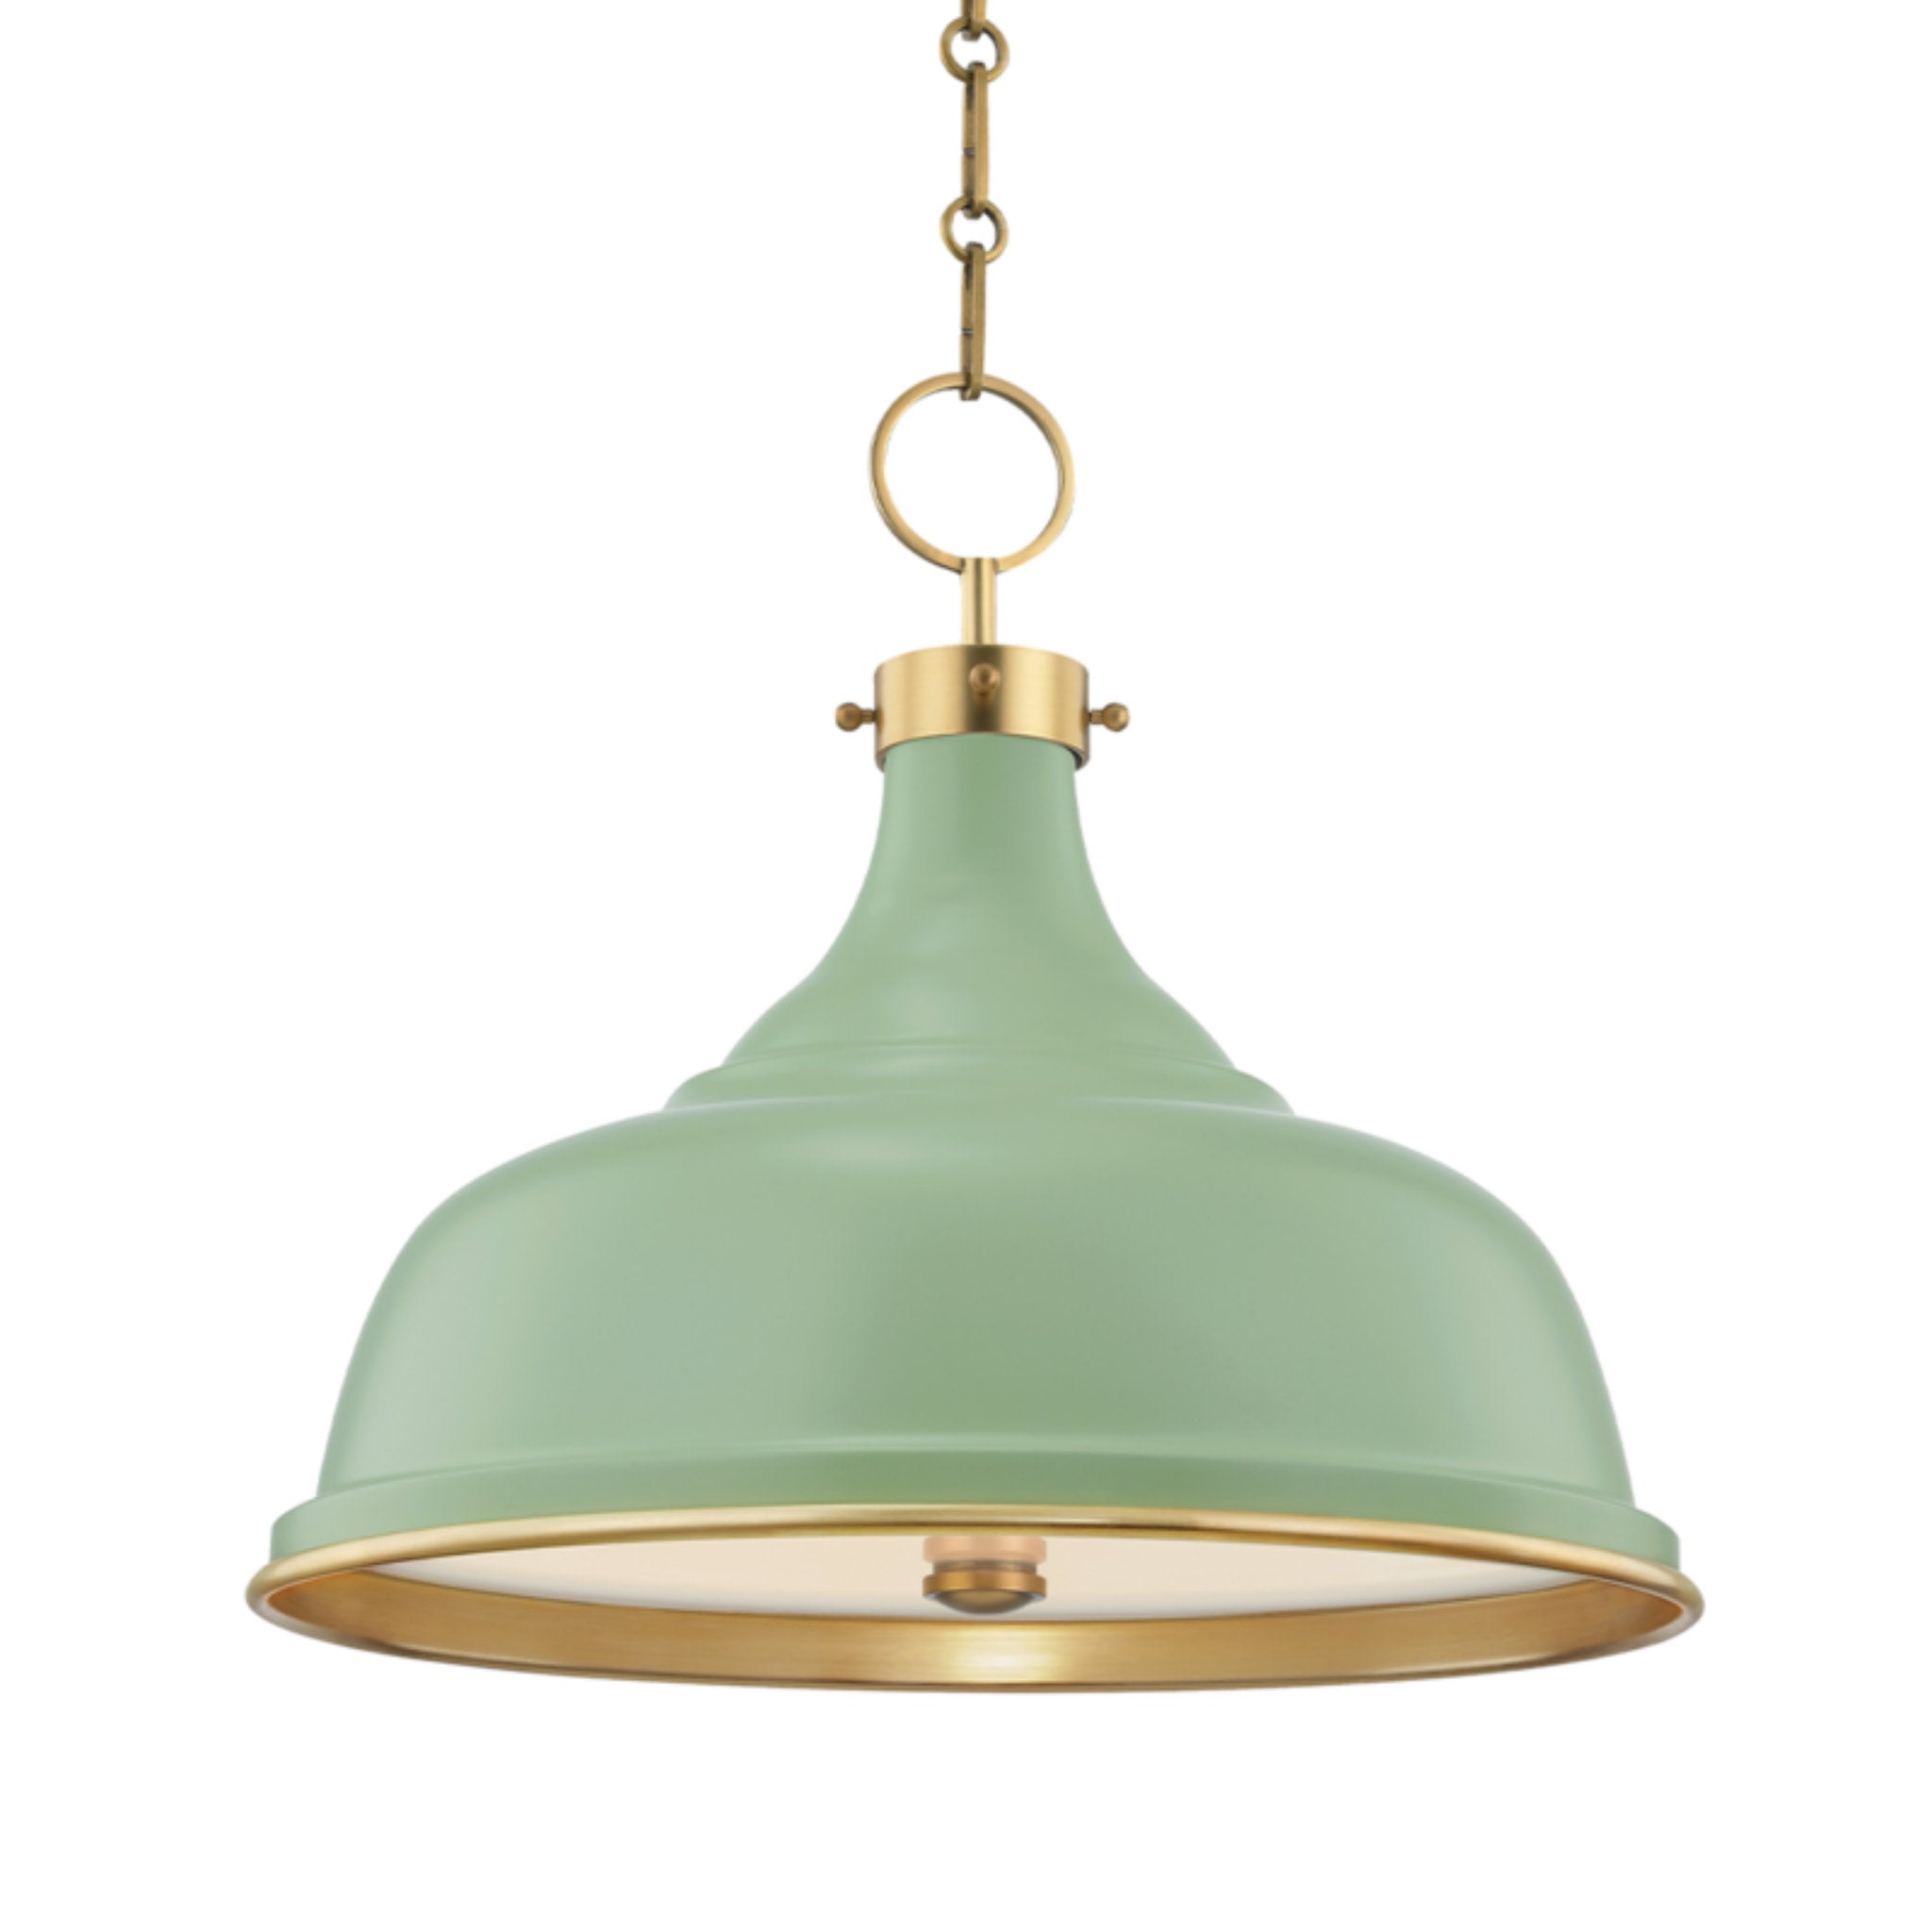 Painted No.1 3 Light Pendant in Aged Brass/leaf Green Combo by Mark D. Sikes